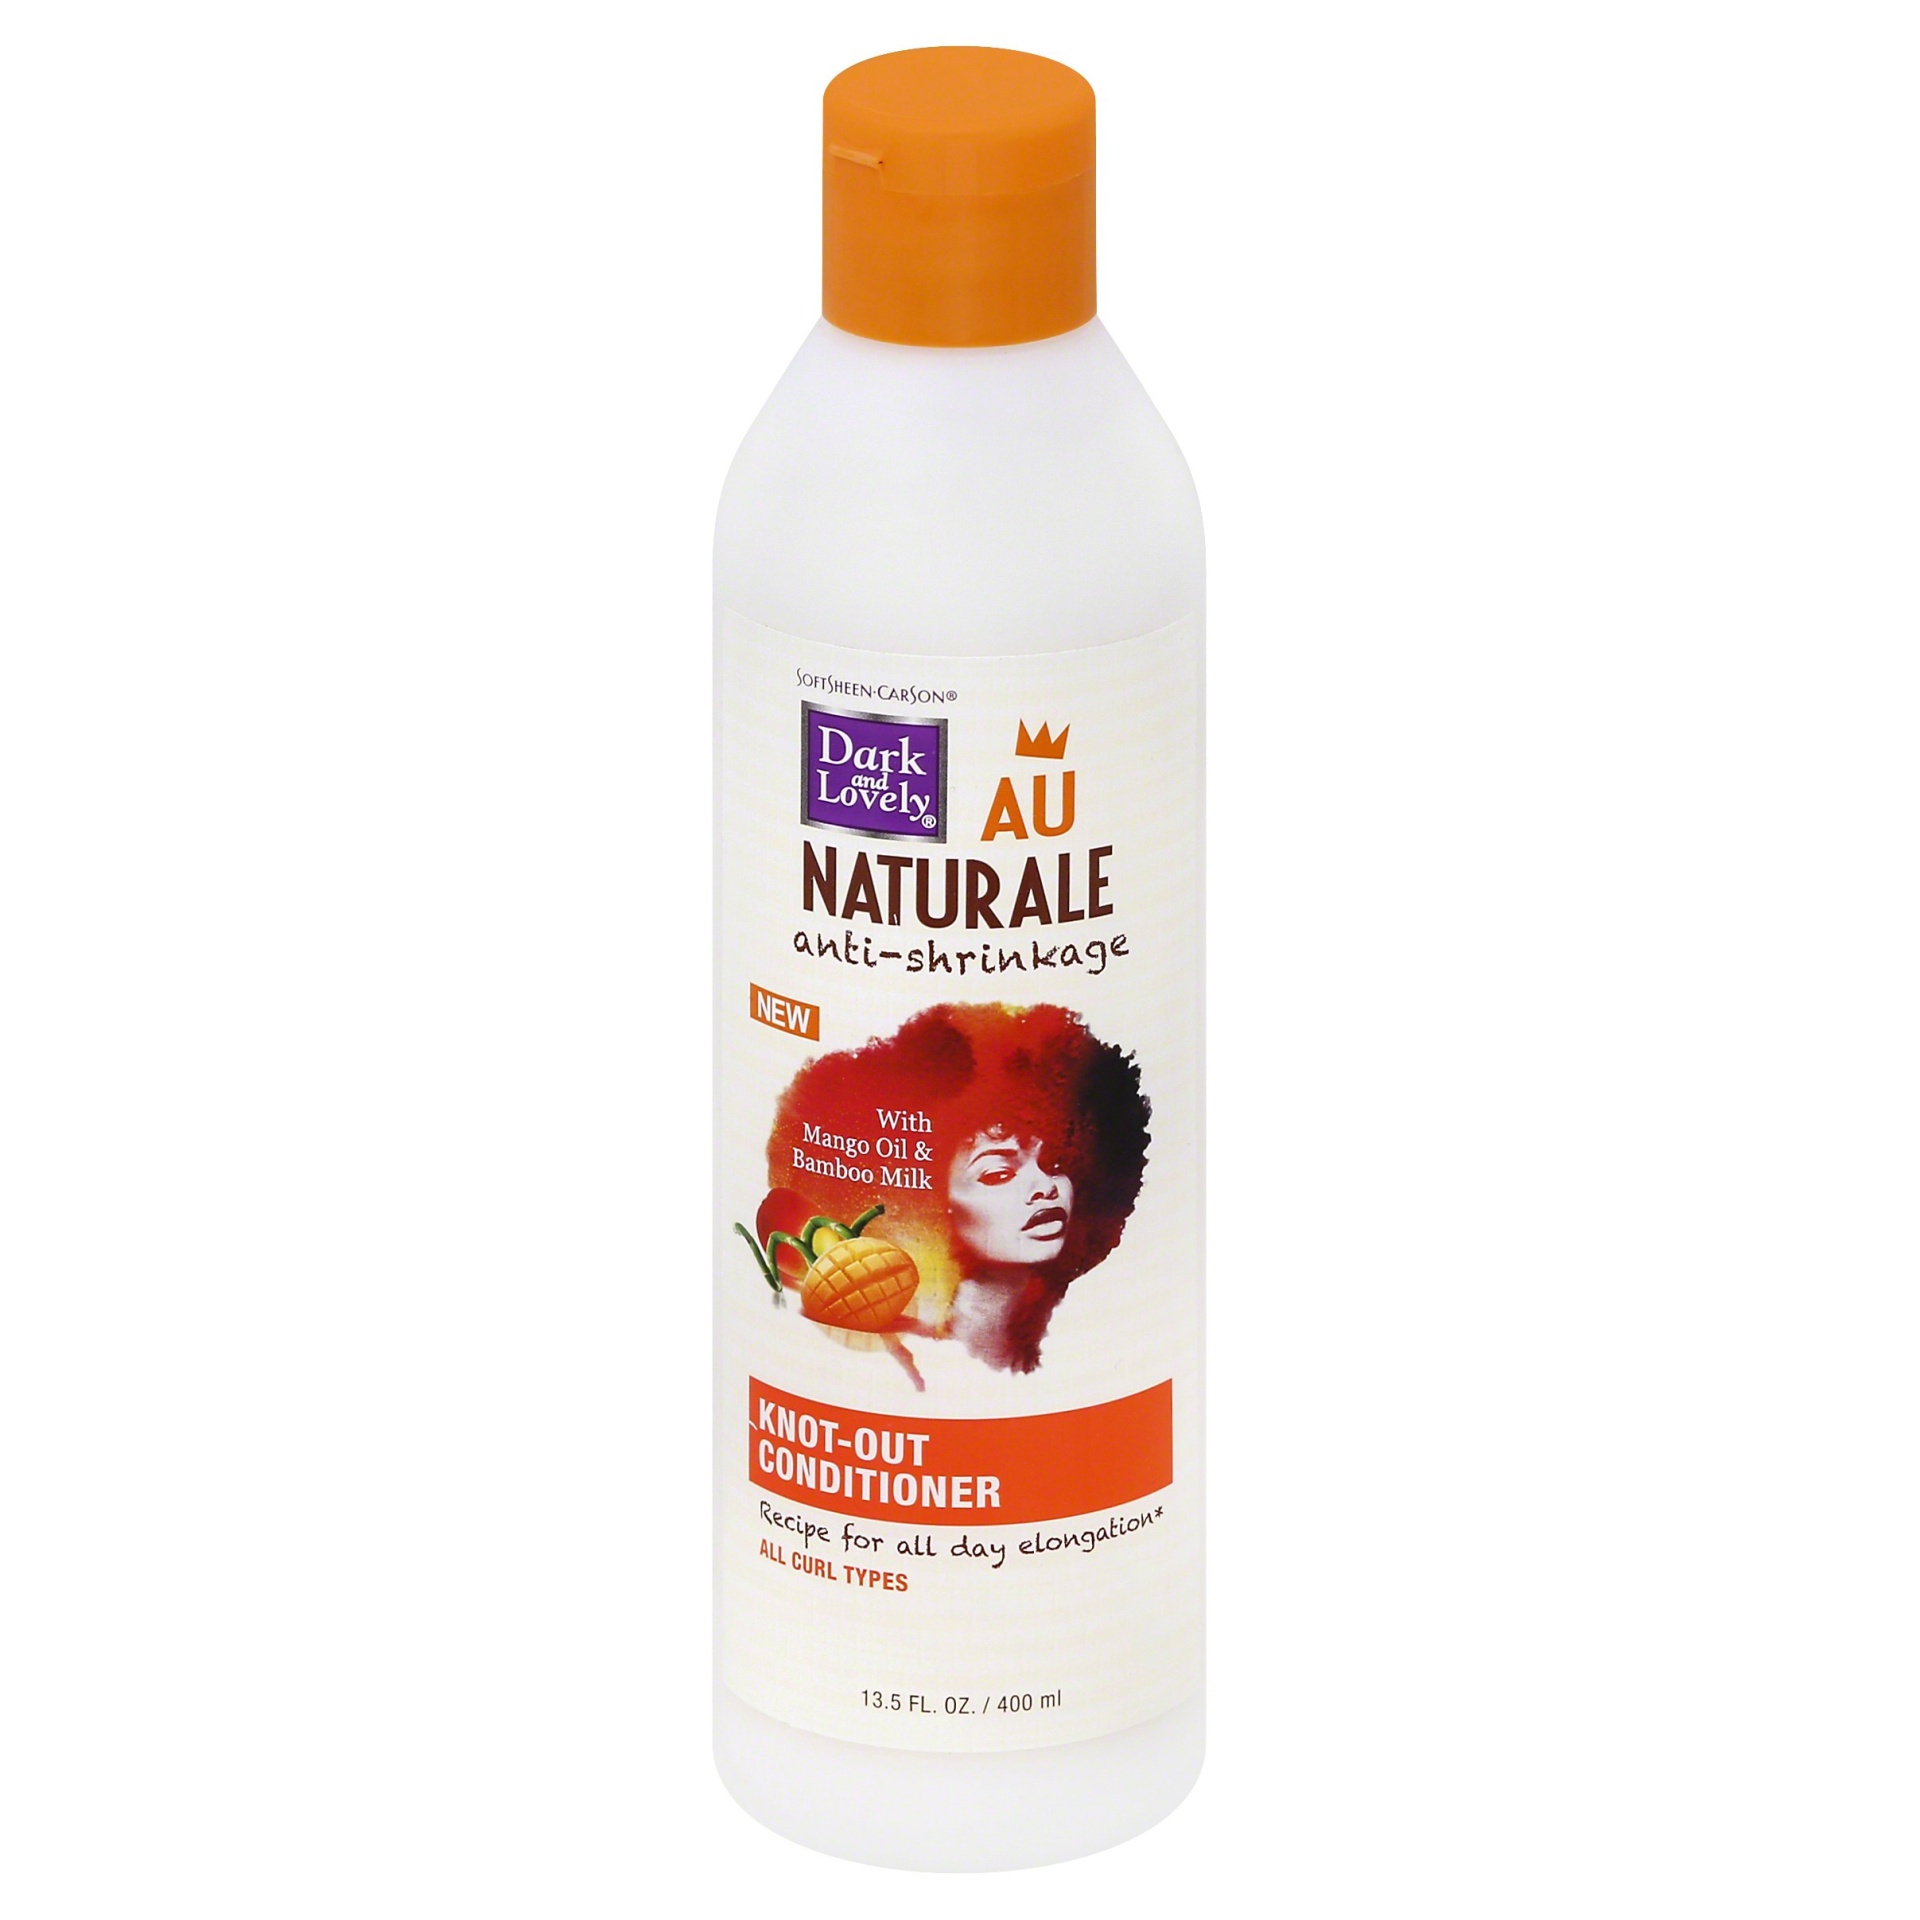 slide 1 of 1, Dark & Lovely Au Naturale Anti-Shrinkage Knot-Out Conditioner, 13.5 fl oz